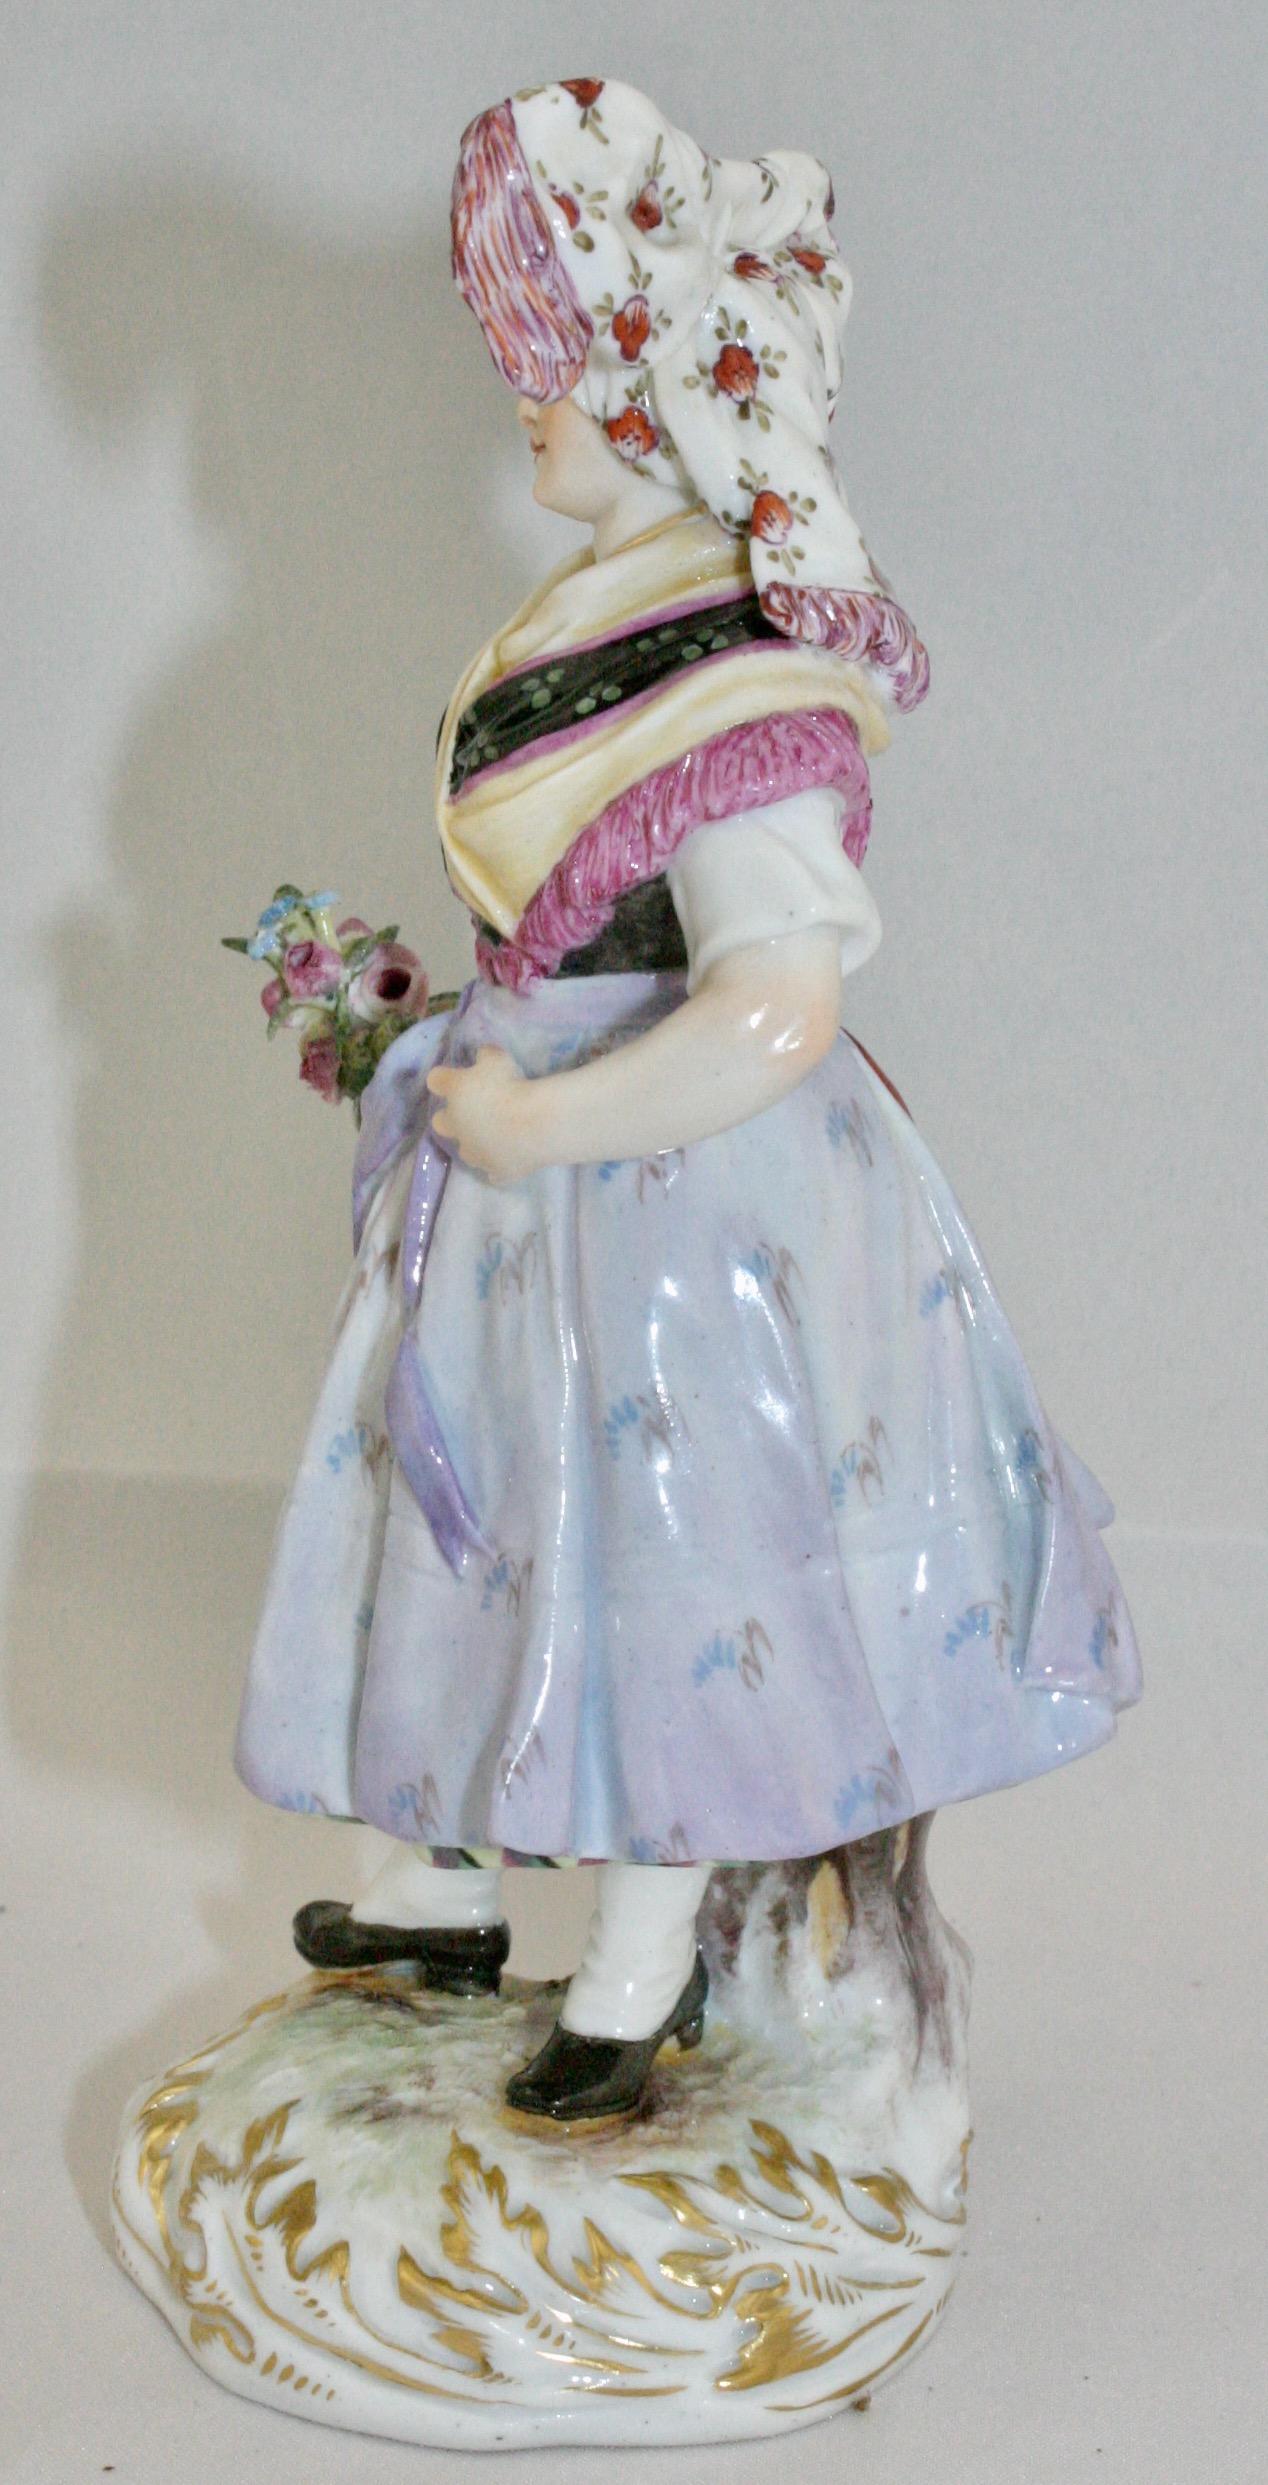 Meissen figure of Lusatian woman holding flowers in national costume, circa 1887. This model designed by Hugo Speiler. It is marked with the Meissen mark, model number Q190d, '52,' and '44' on the base. The figure is 6 inches tall X 2 7/8 inches